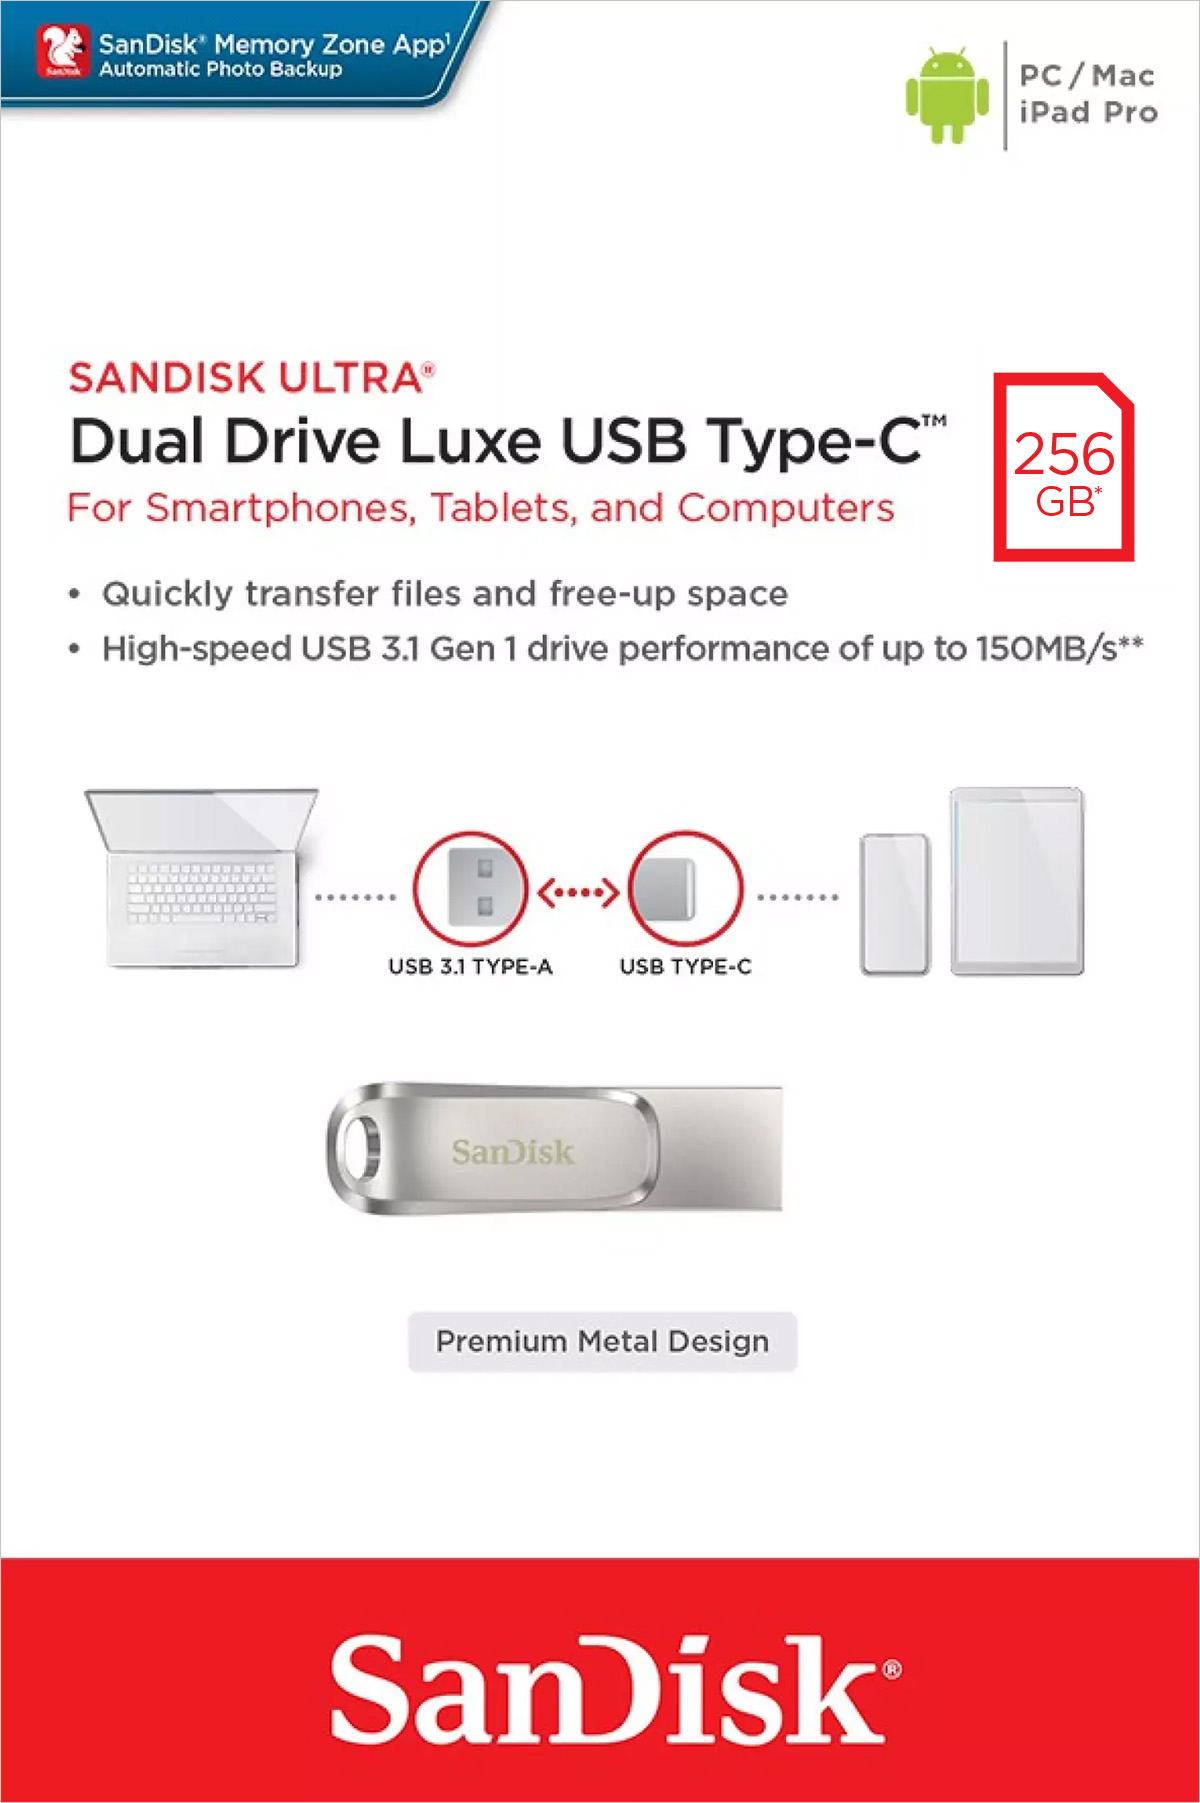 Sandisk USB 3.1 OTG Stick 256GB, Dual Drive Luxe Typ-A-C, (R) 150MB/s, Memory Zone, Retail-Blister